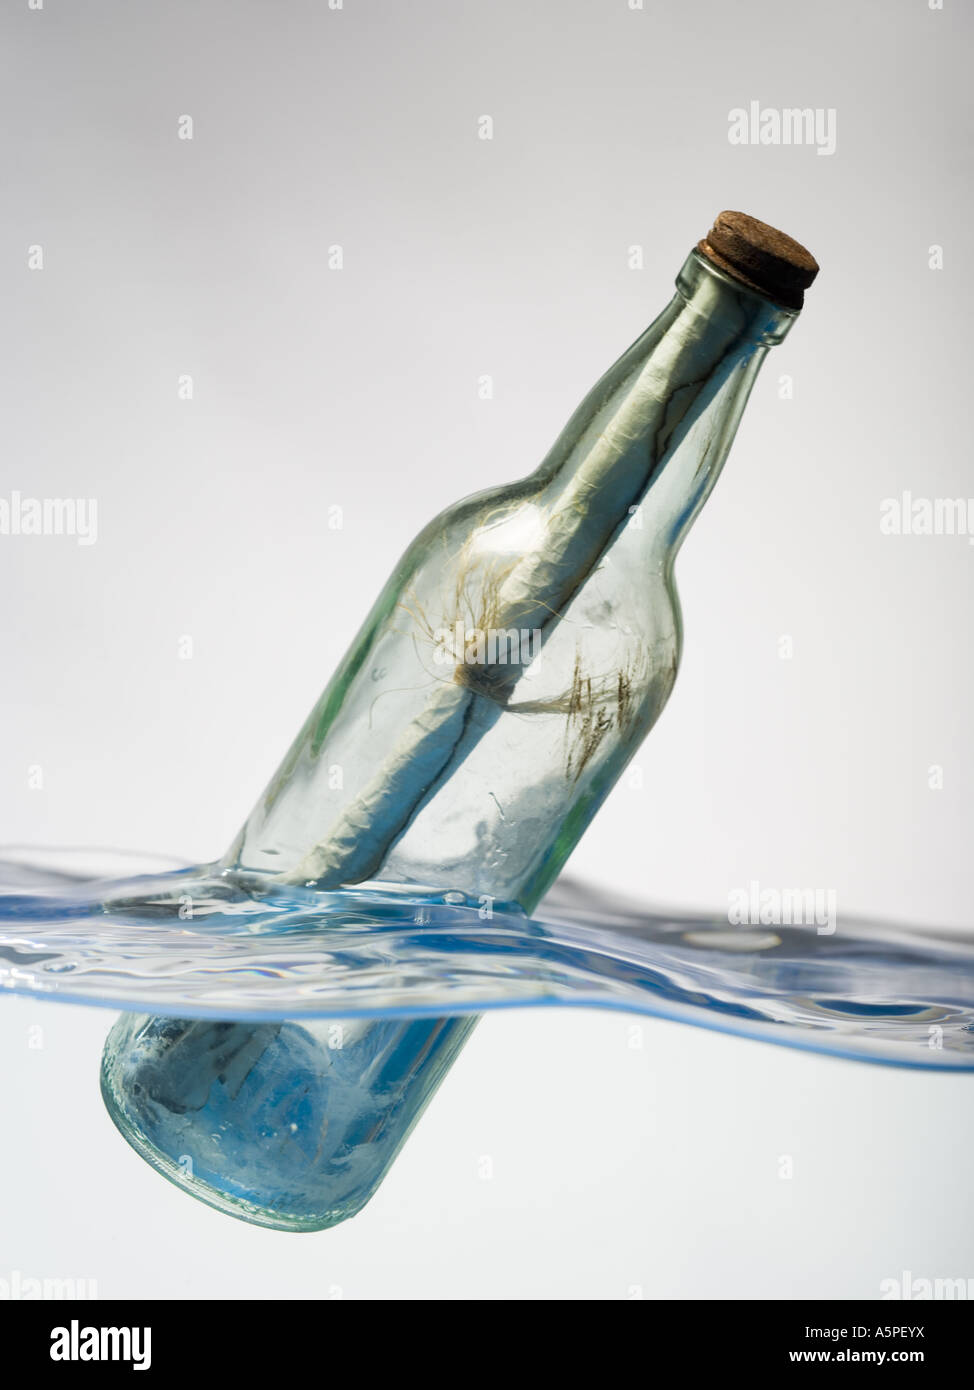 Message in a floating bottle Stock Photo - Alamy